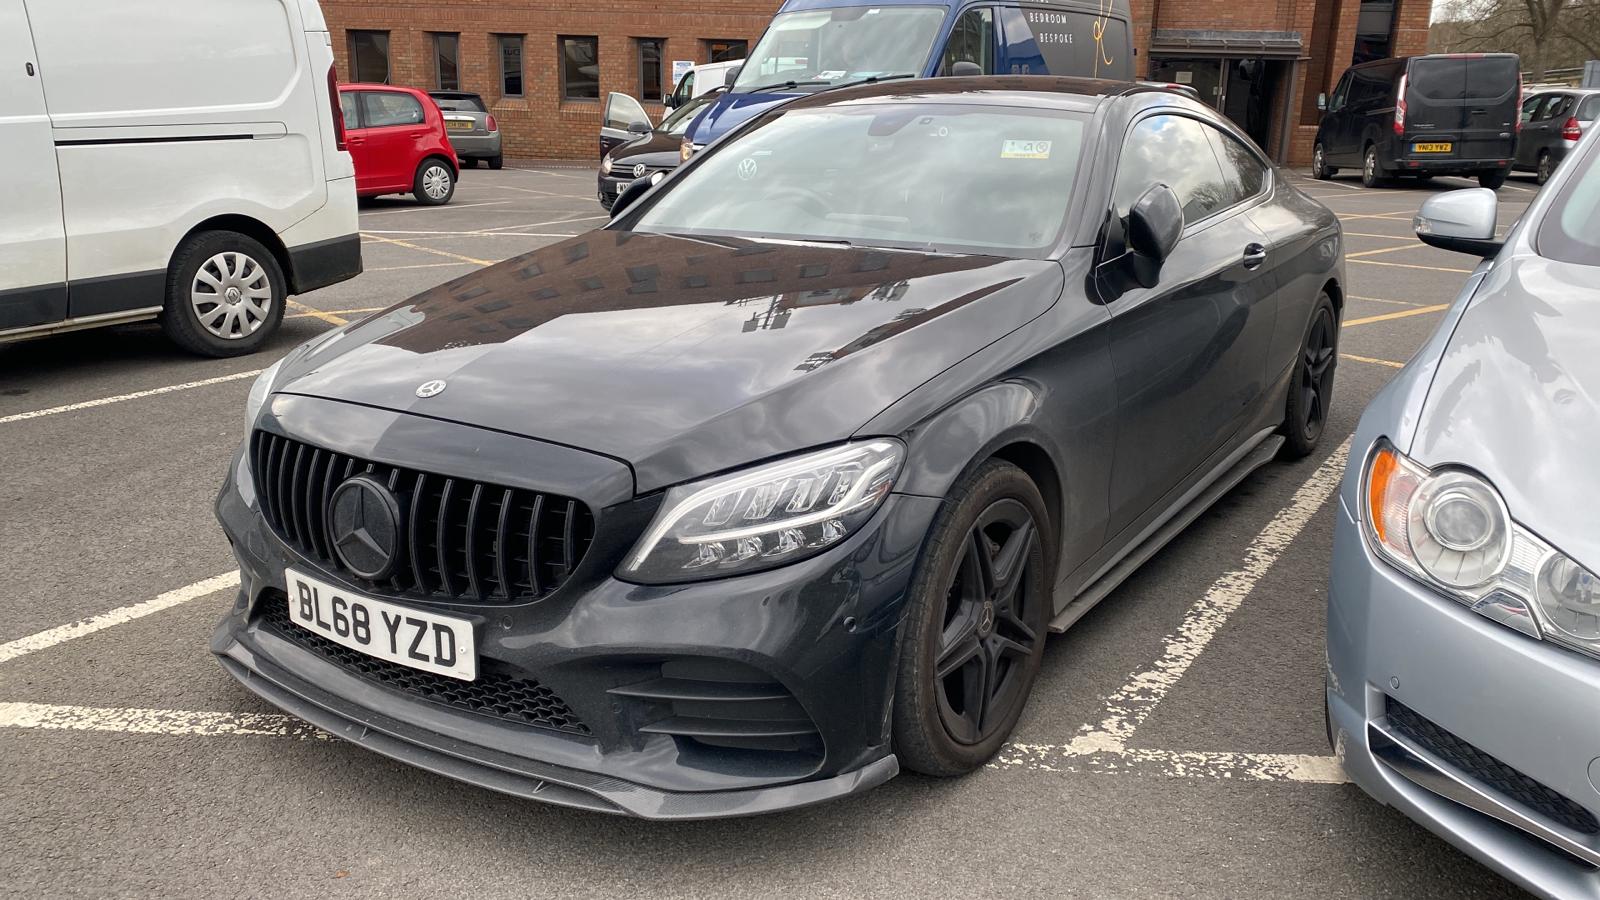 BLAK BY CT GRILLE MERCEDES W205 C CLASS 2019+ BLACK GRILLE (WITH CAMERA) - BLAK BY CT CARBON